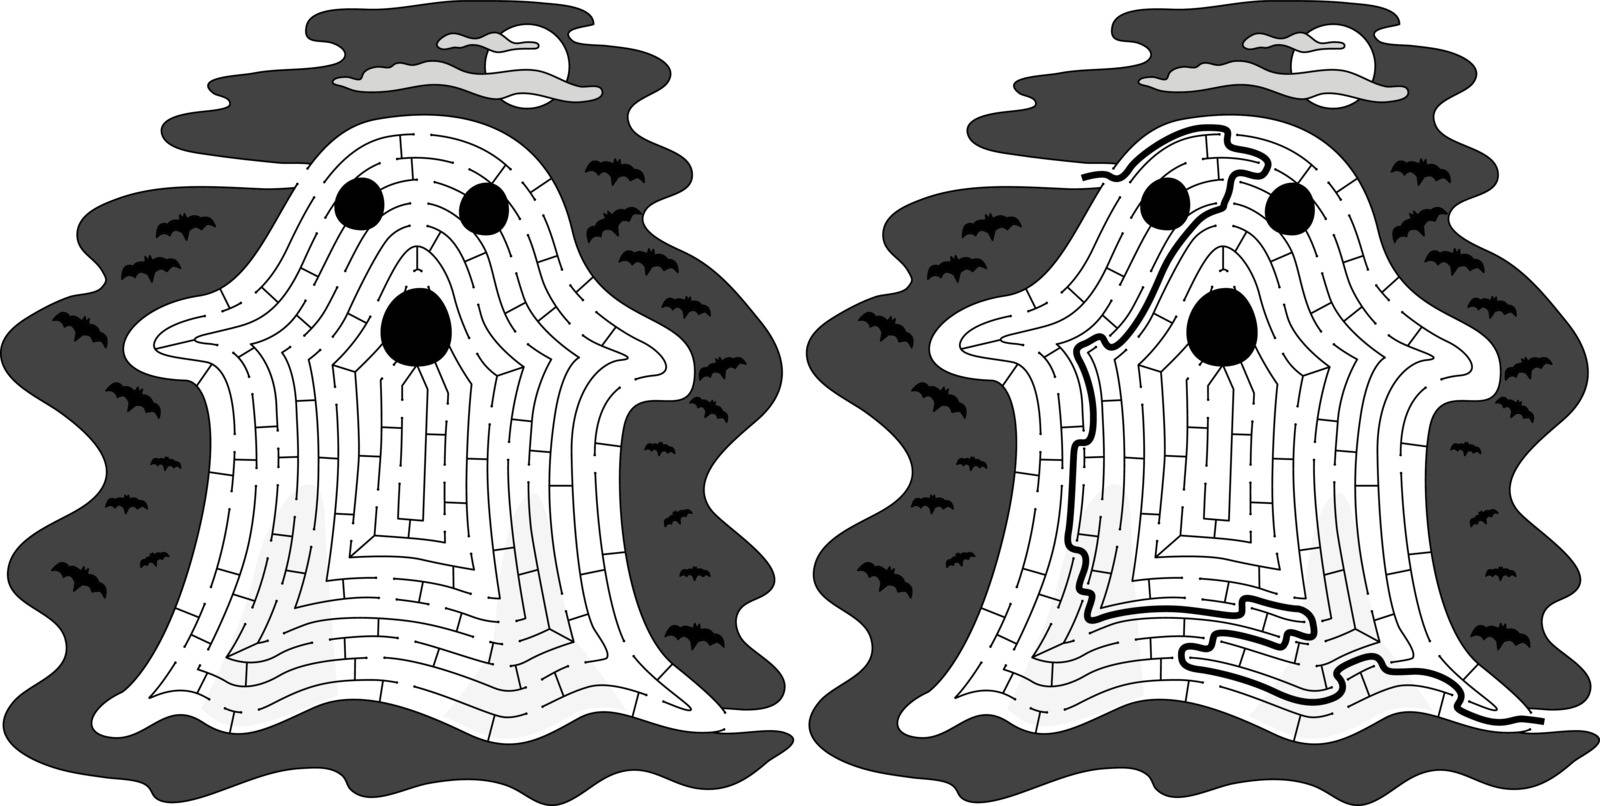 Ghost maze for kids with a solution in black and white